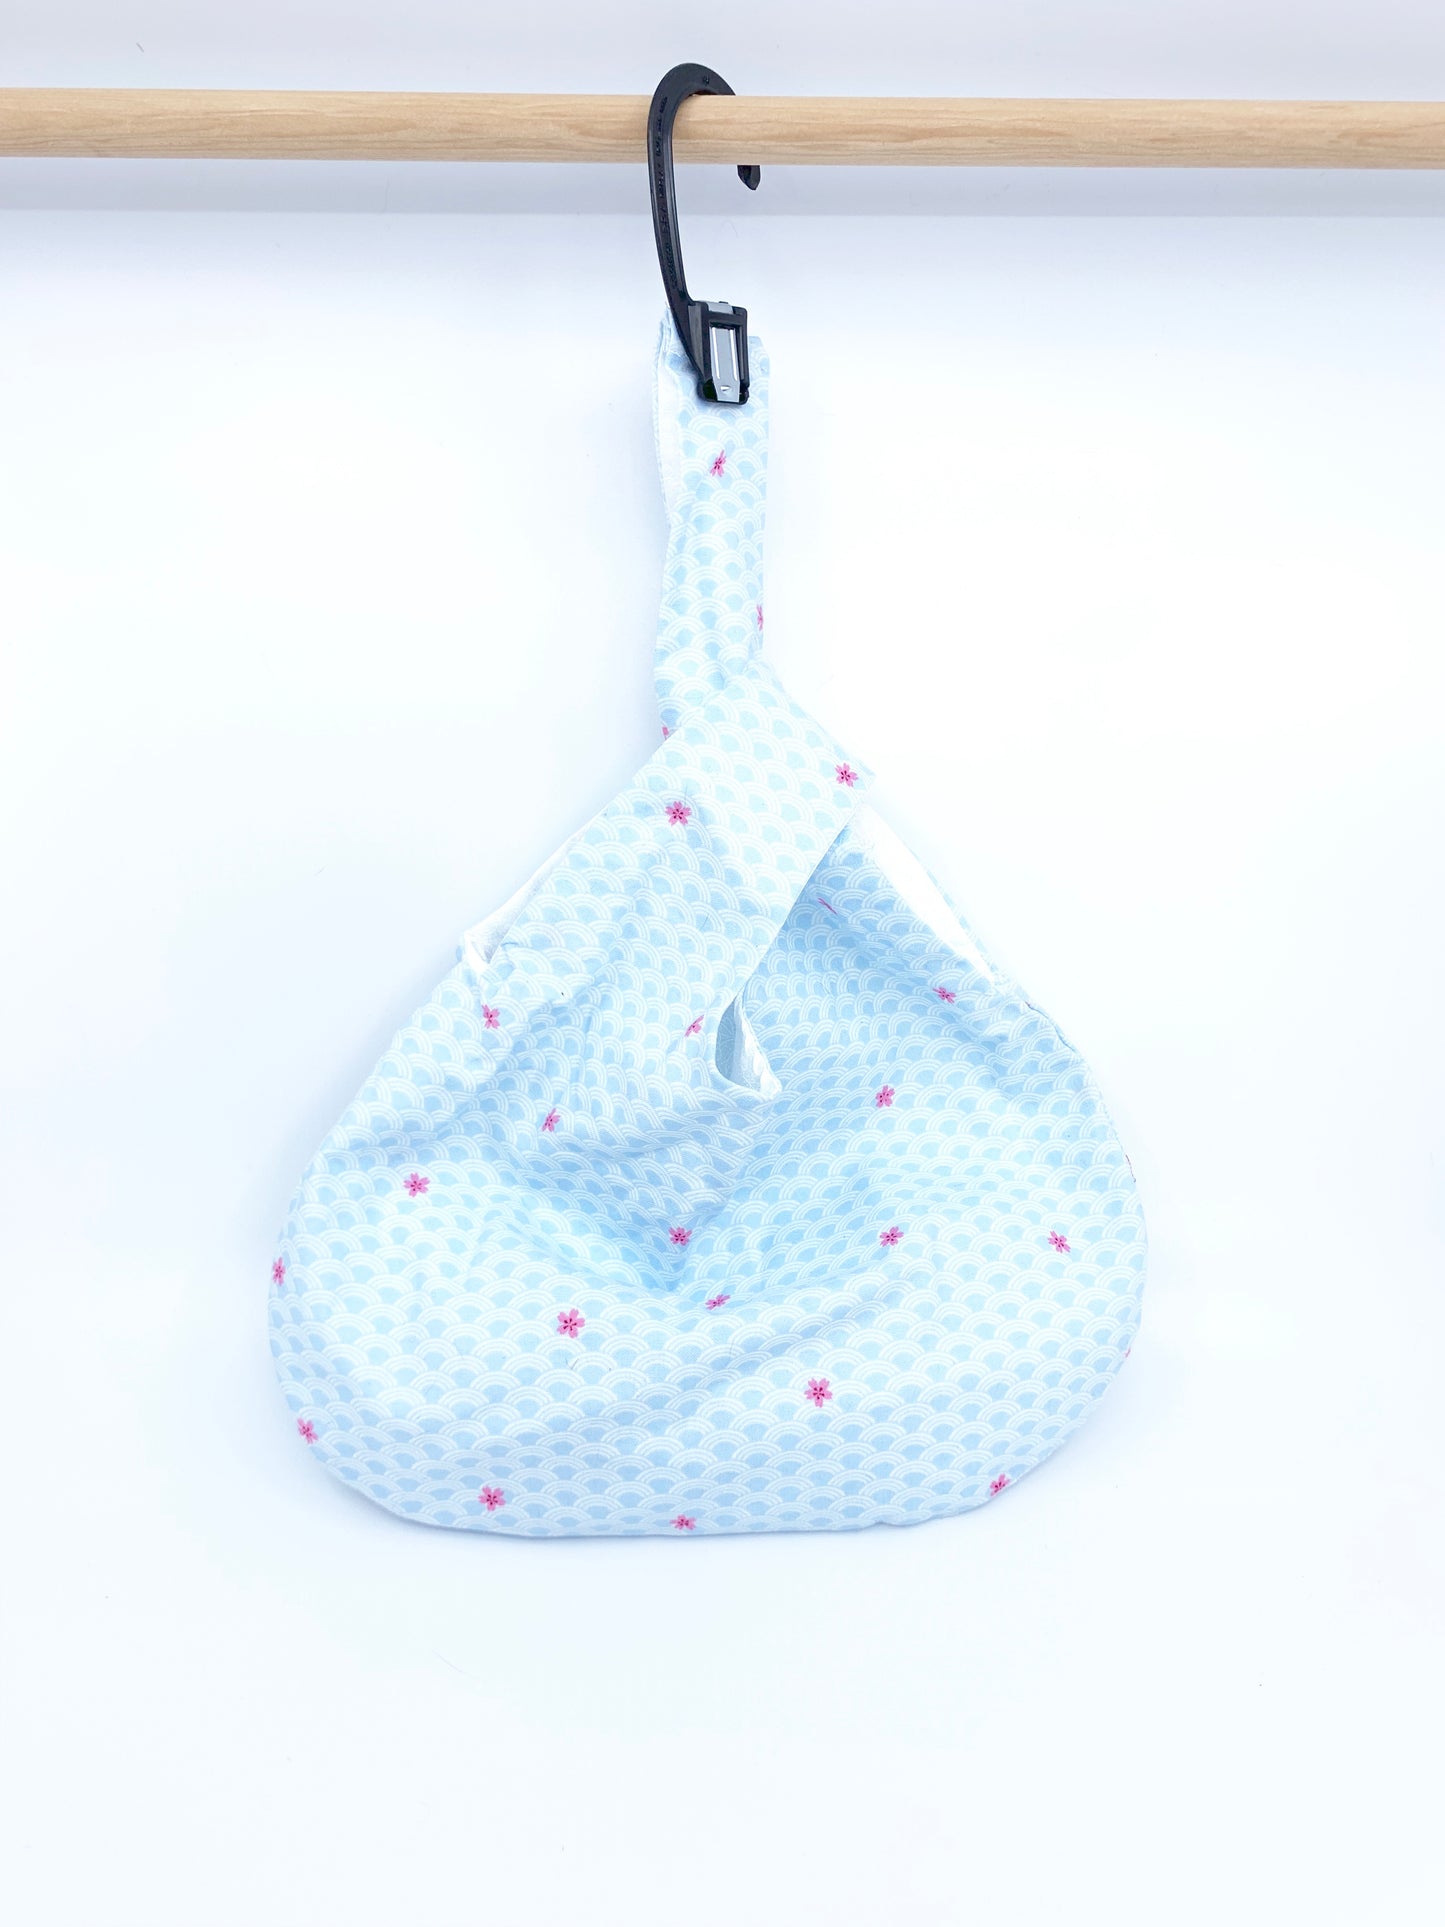 Knot Bag | Scallop Waves and Sakura Light Blue | Project Bag for Knitters